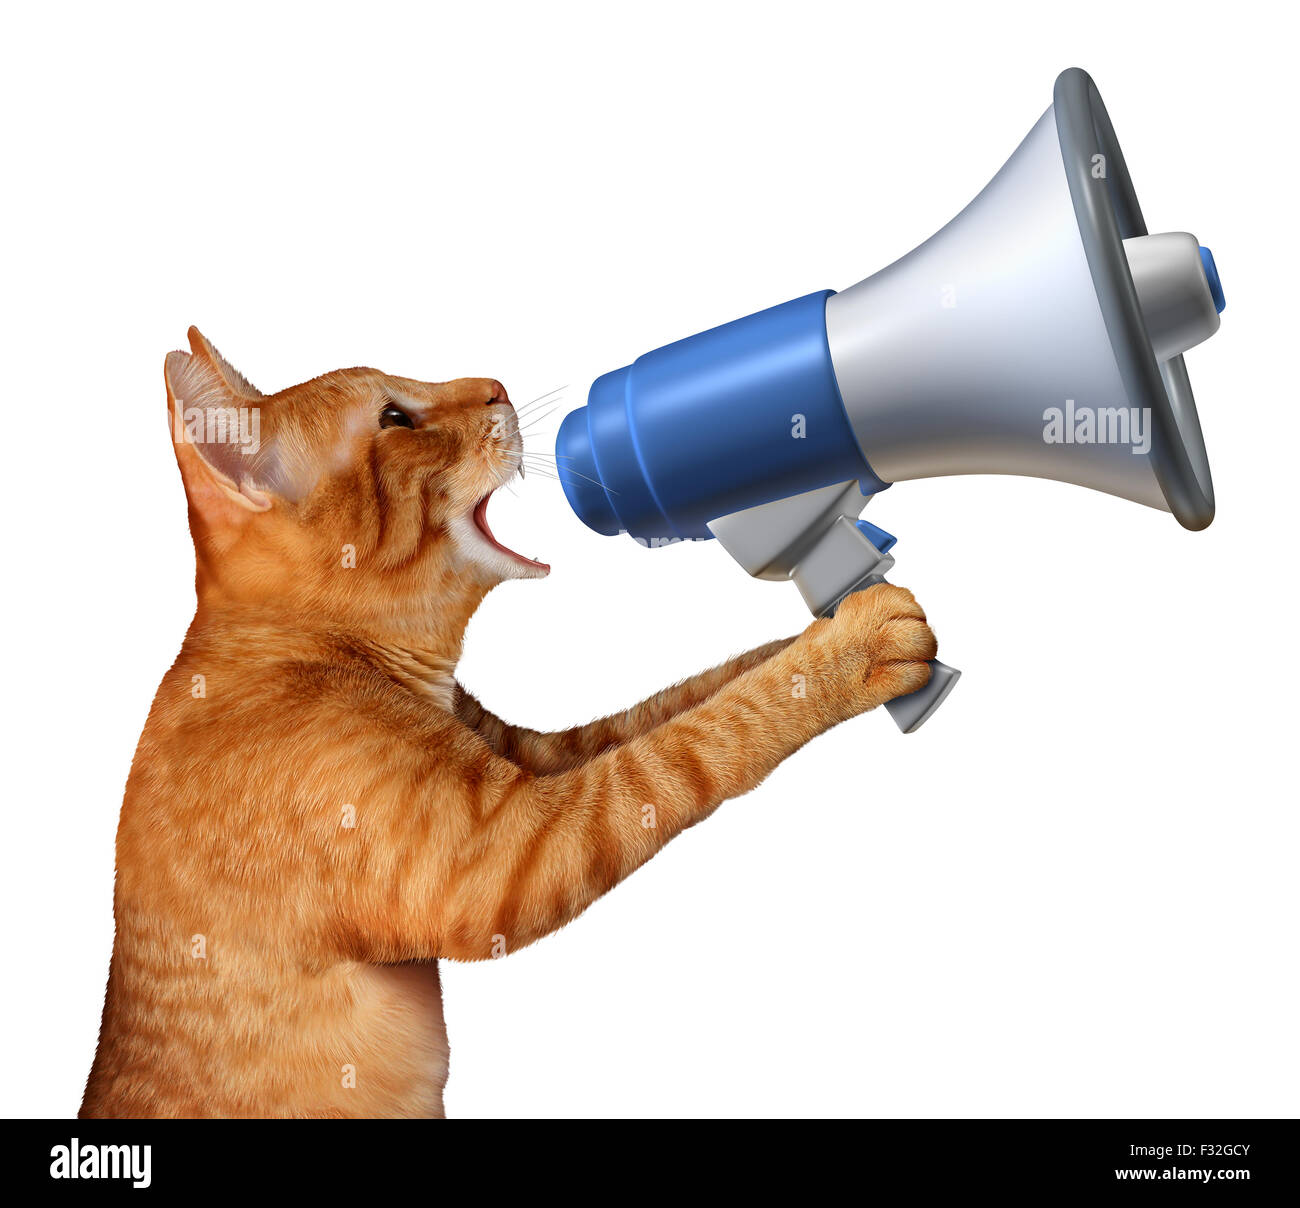 Cat announcement concept as a generic feline holding a bullhorn or megaphone to announce news or promote pet and veterinary issues or animal marketing and promotion isolated on a white background. Stock Photo